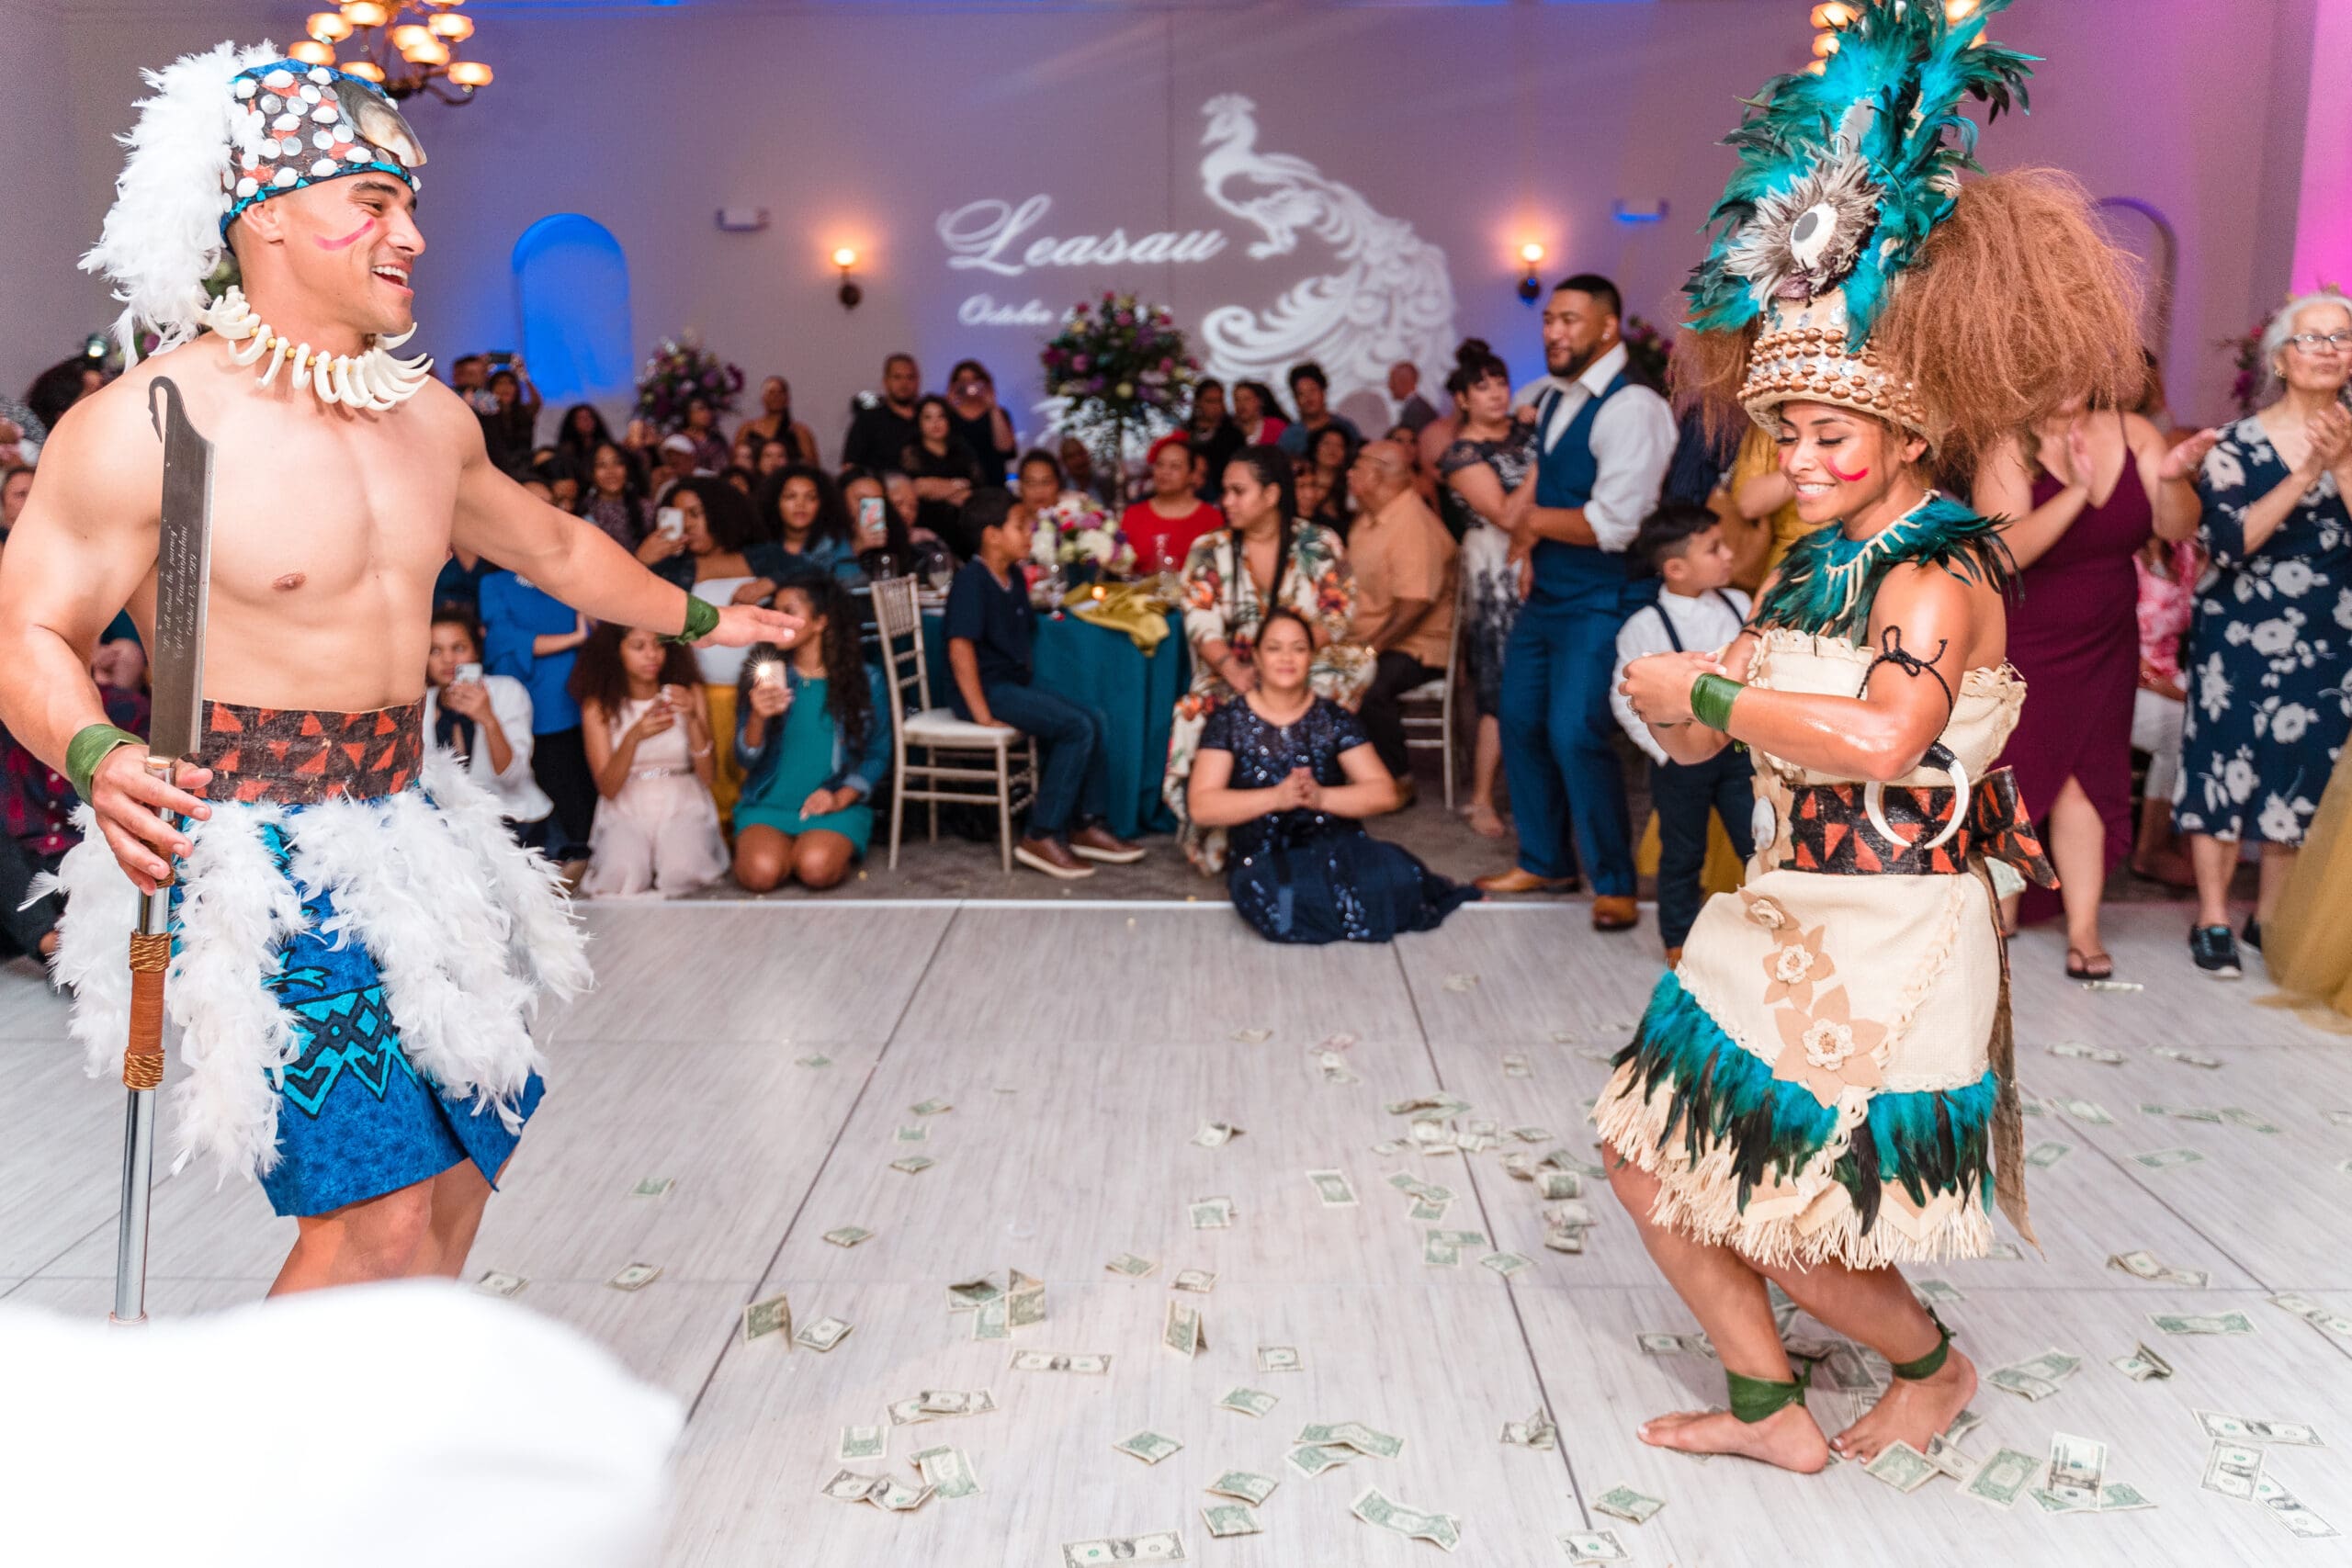 Husband and wife dressed in traditional Hawaiian wedding attire, dancing joyfully on a floor strewn with money, celebrating their union in a cultural tradition.